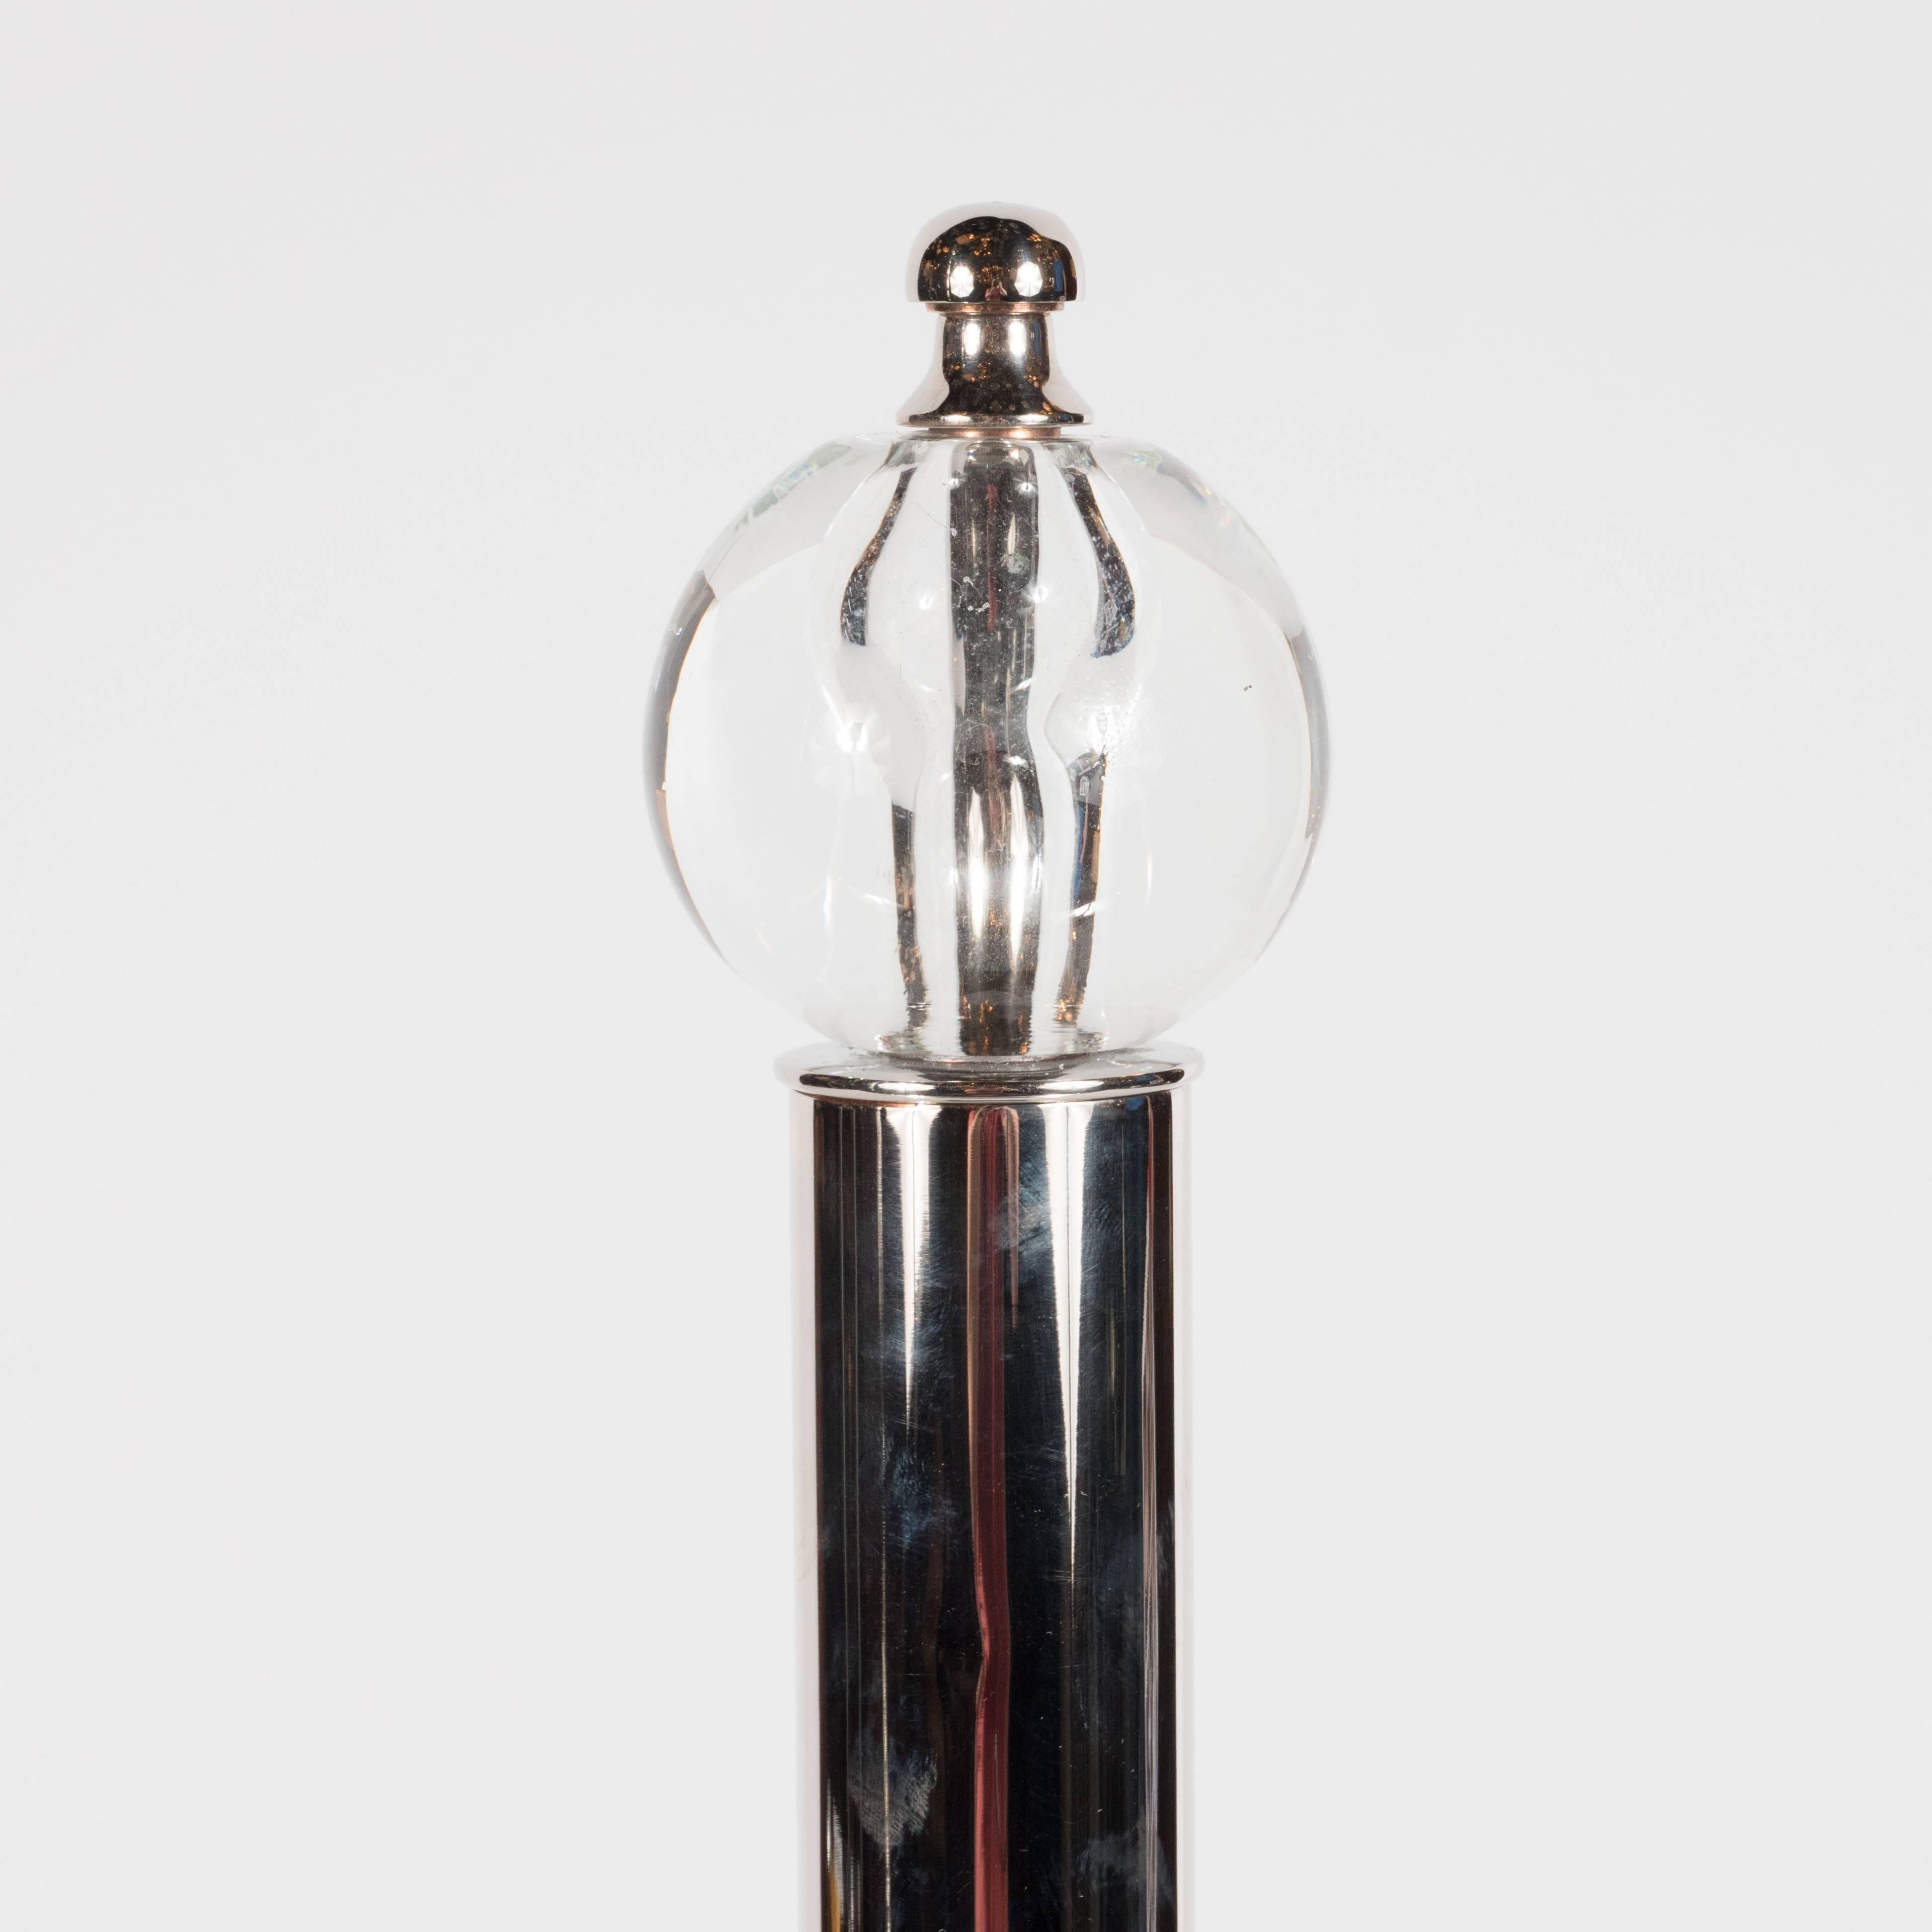 This stunning set of machine age andirons was realized in the United States, circa 1935, in the manner of Donald Deskey. A cylindrical body in lustrous chrome ascends upwards from a square base (also in chrome). At its apex, a thin chrome rod